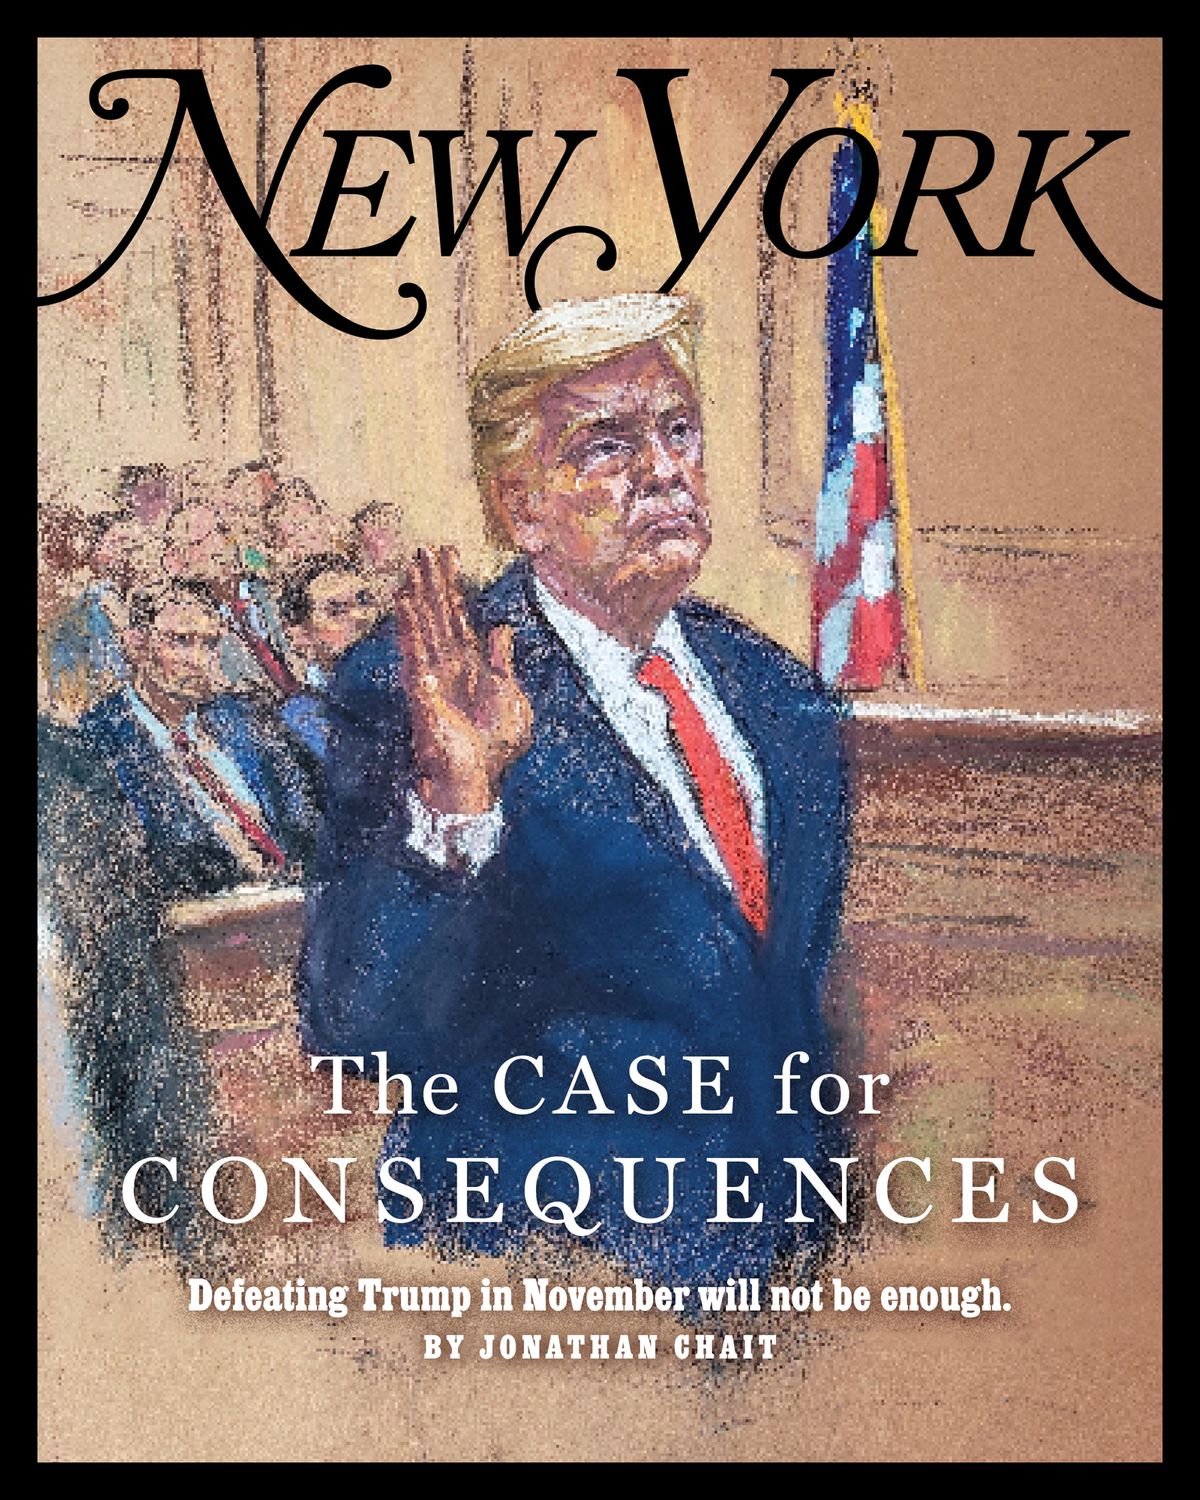 On the cover of New York: 